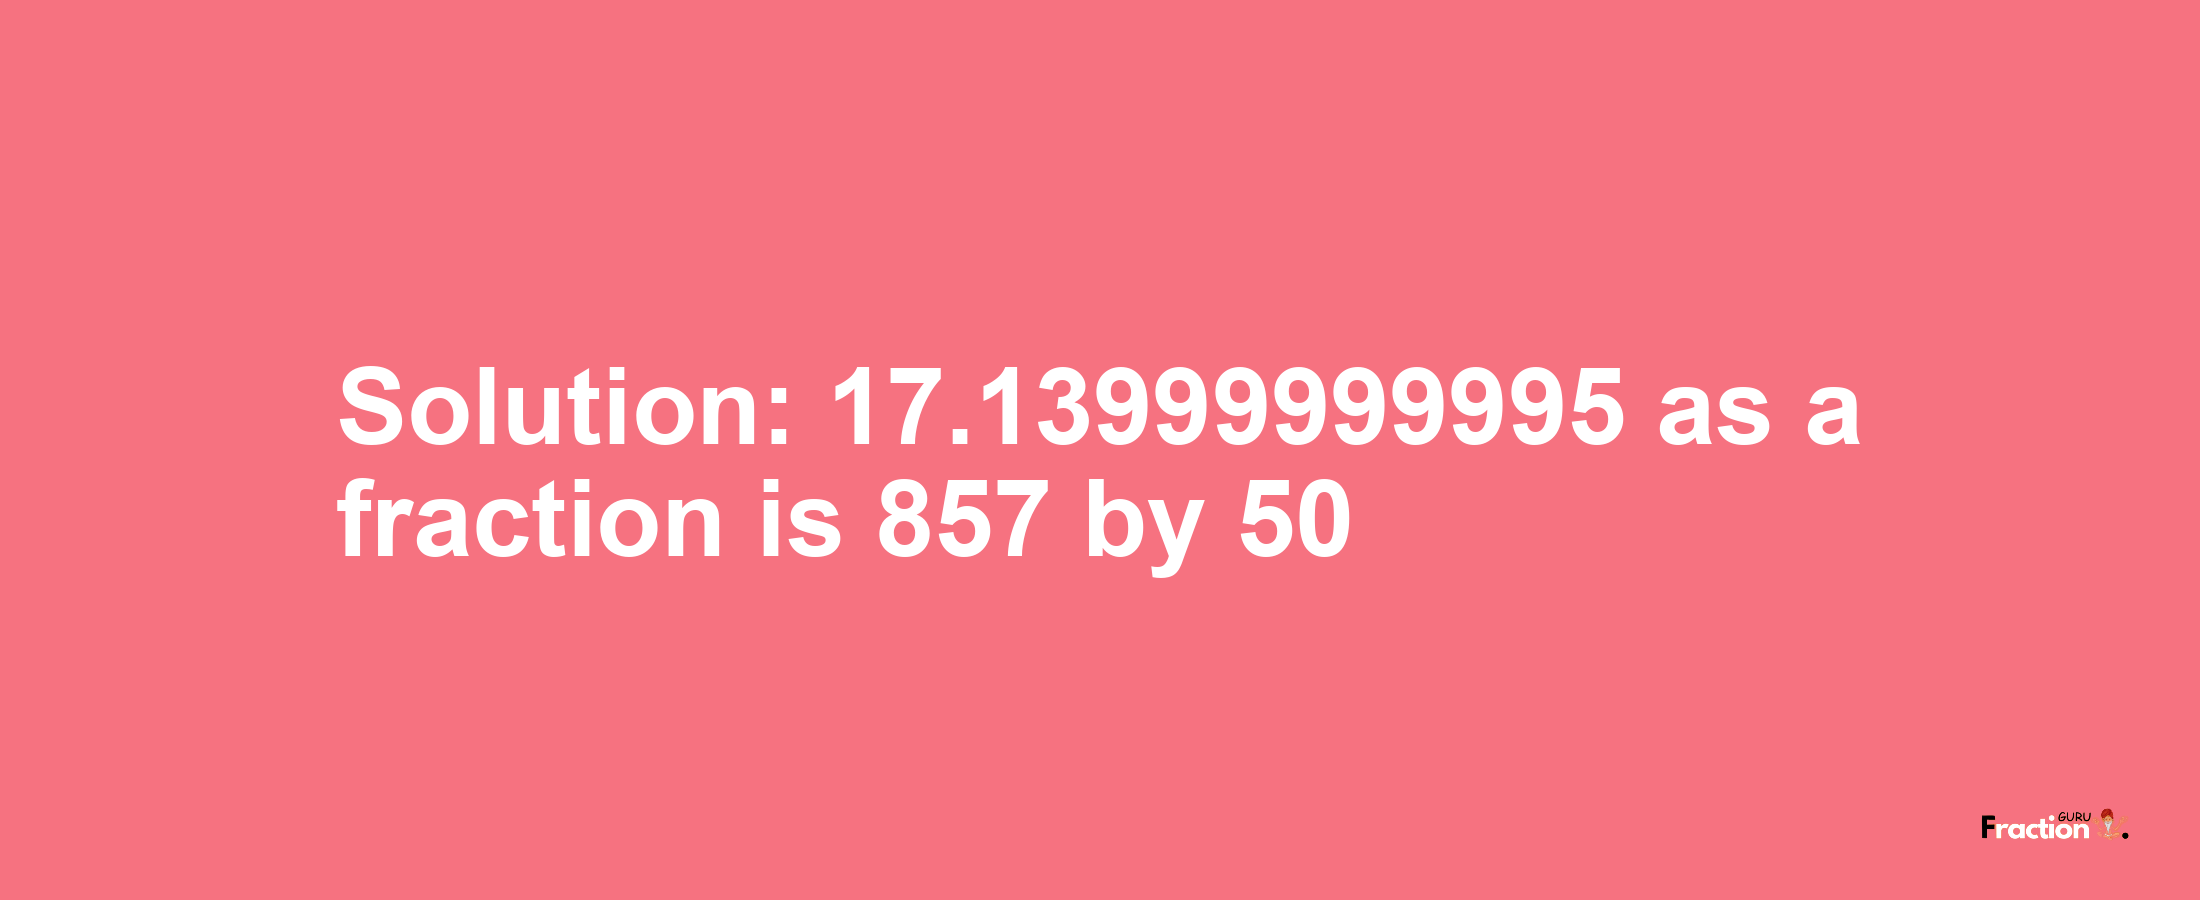 Solution:17.13999999995 as a fraction is 857/50